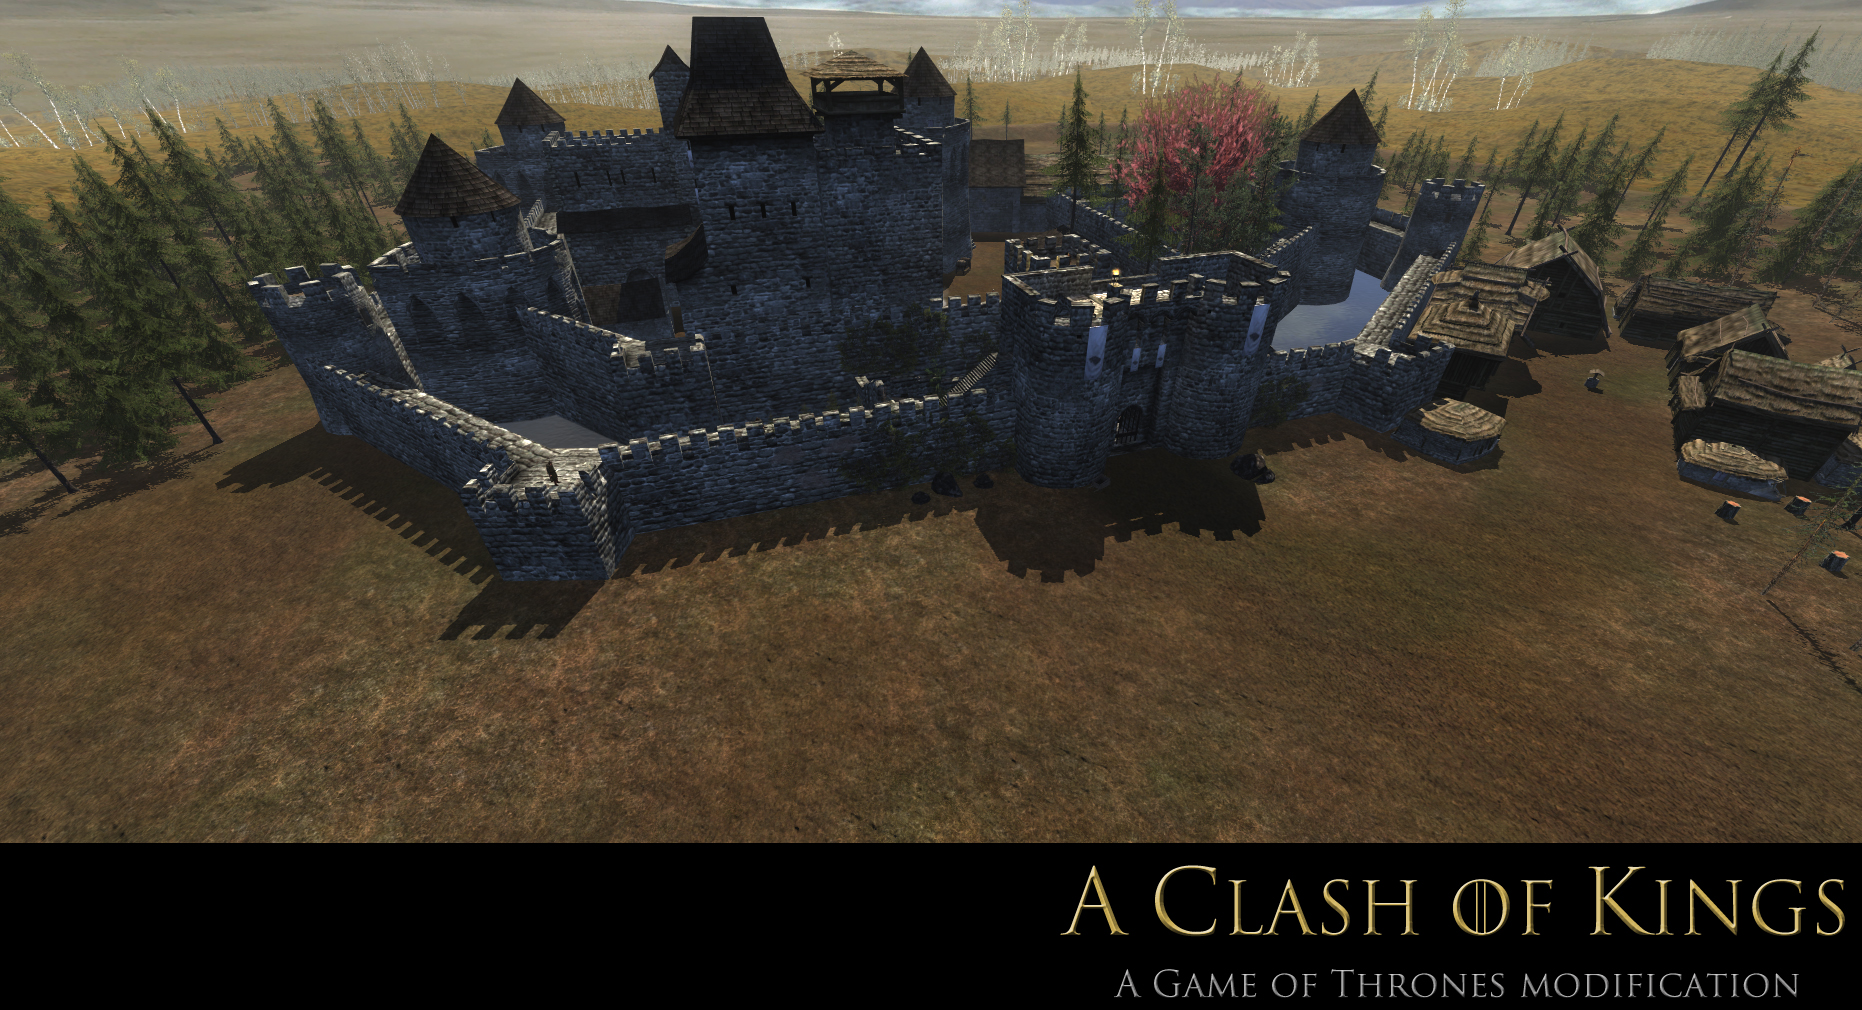 Mount & Blade: Warband. A Clash of Kings (Game of Thrones) 6.0